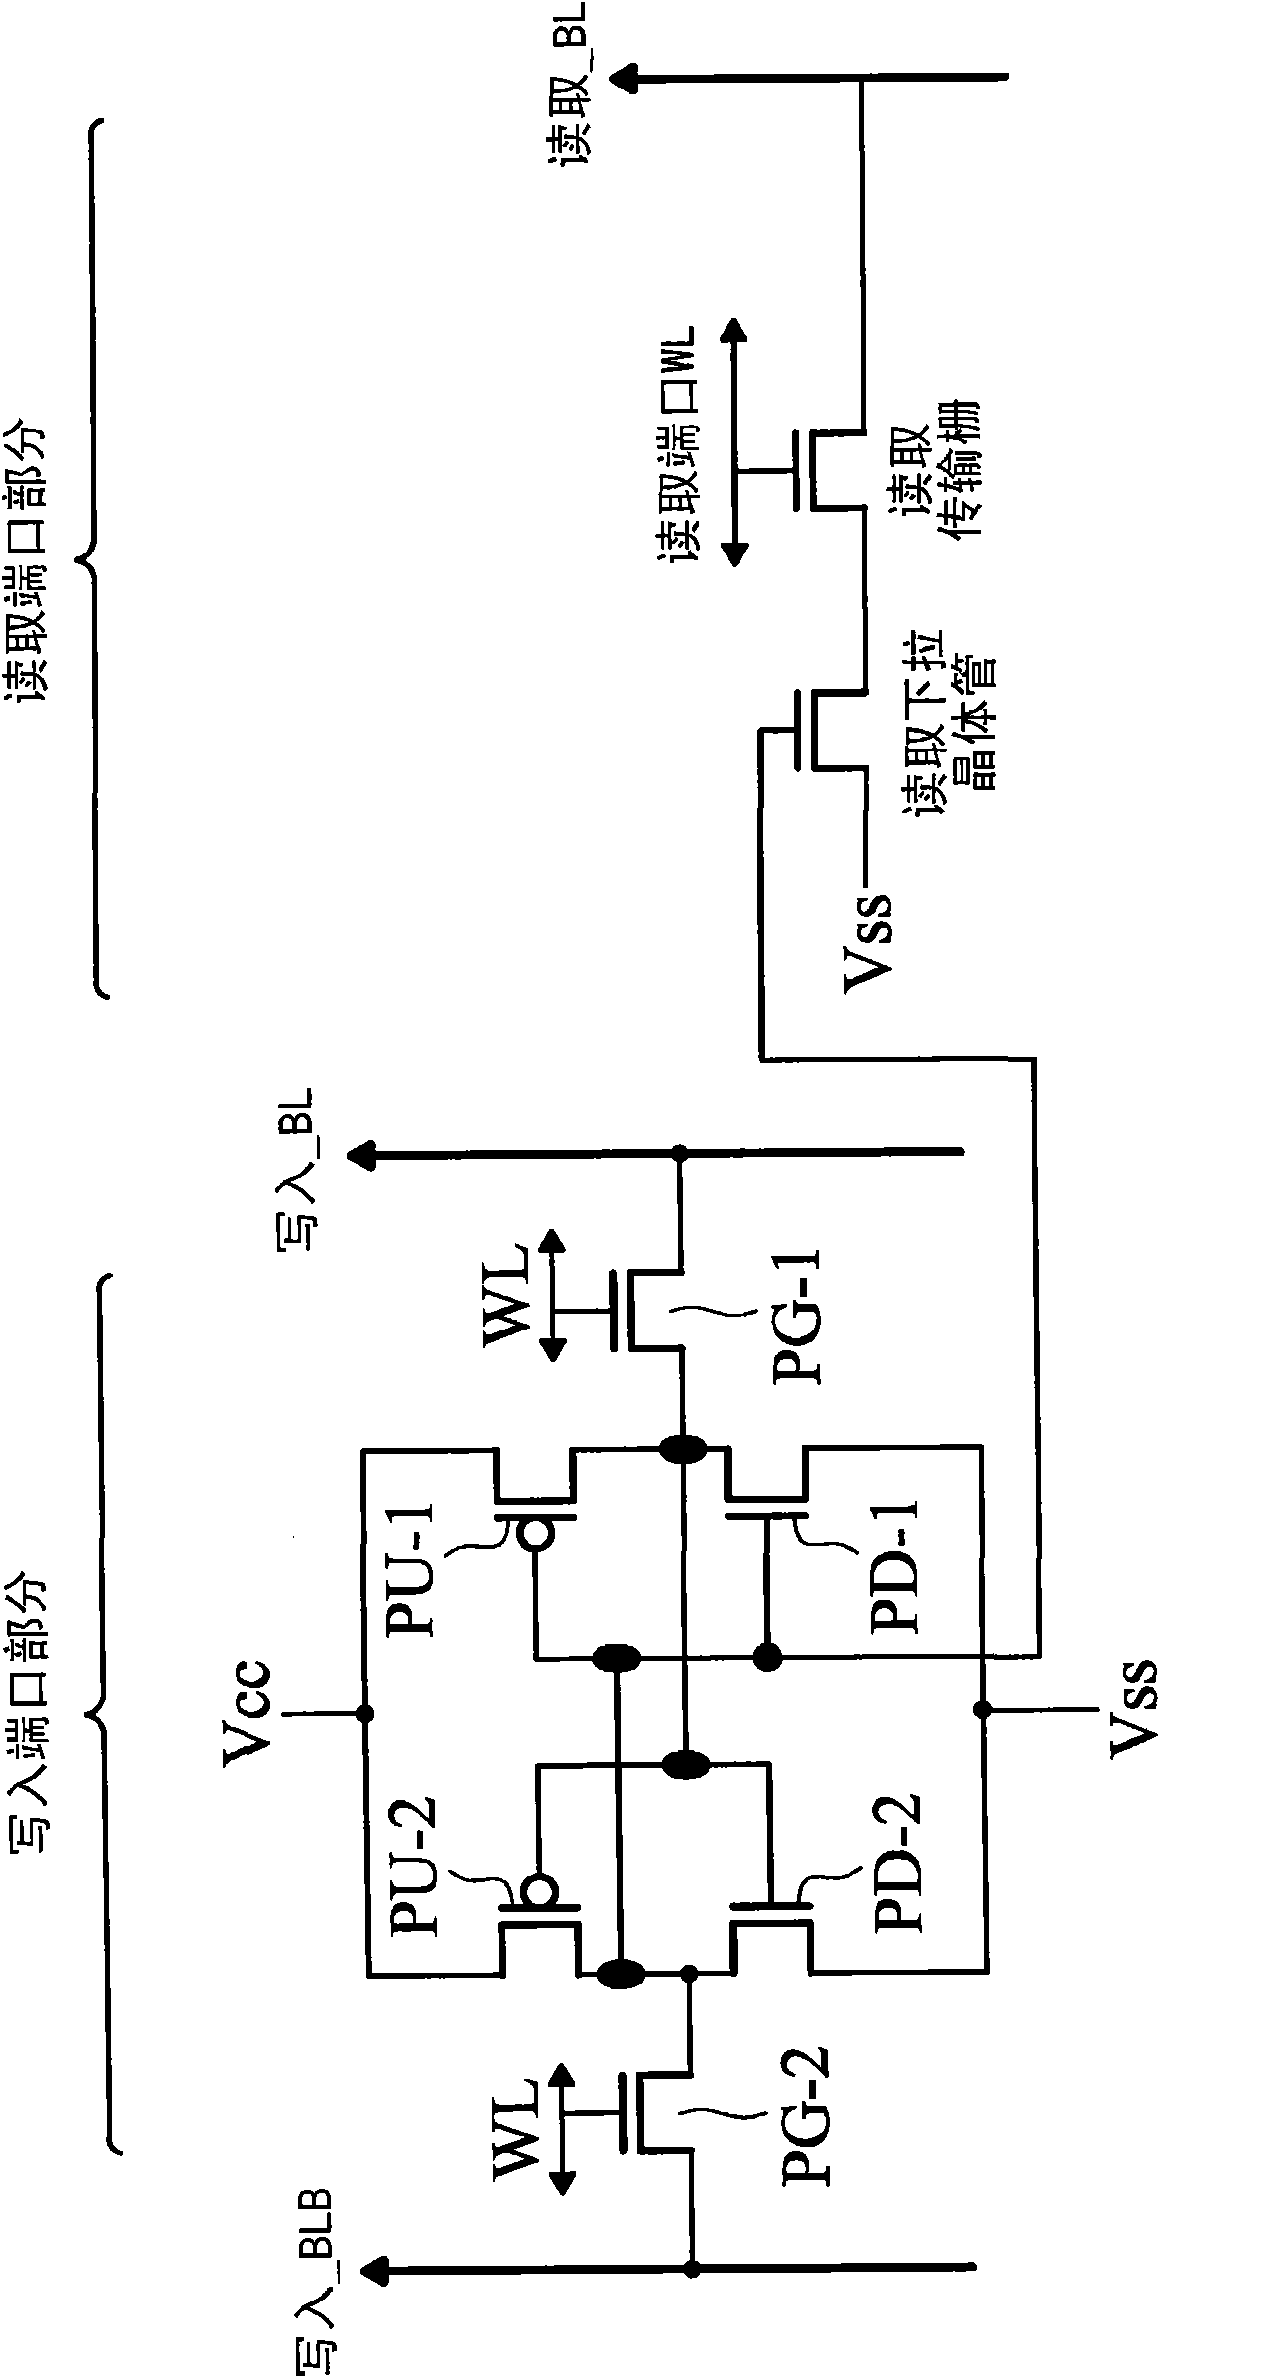 Embedded sram structure and chip